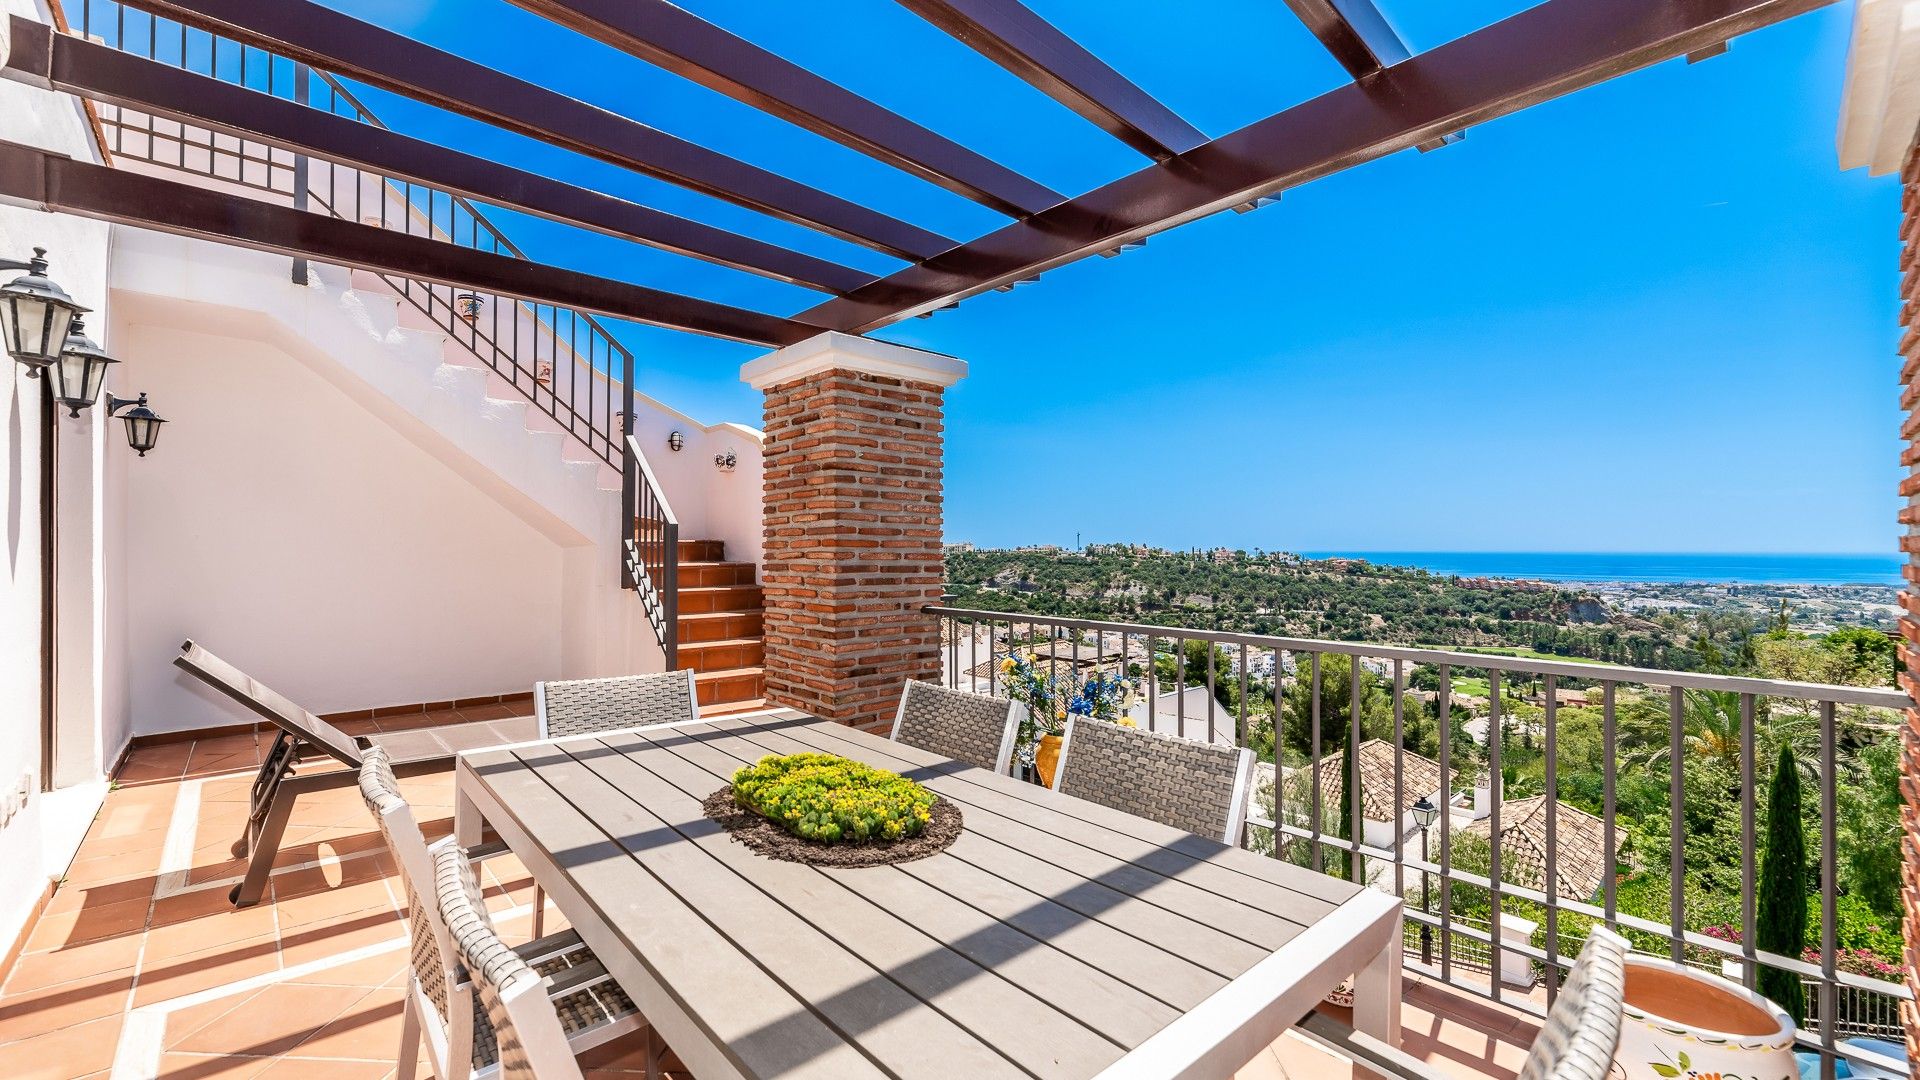 Penthouse with 360 views of the sea and golf | Engel & Völkers Marbella